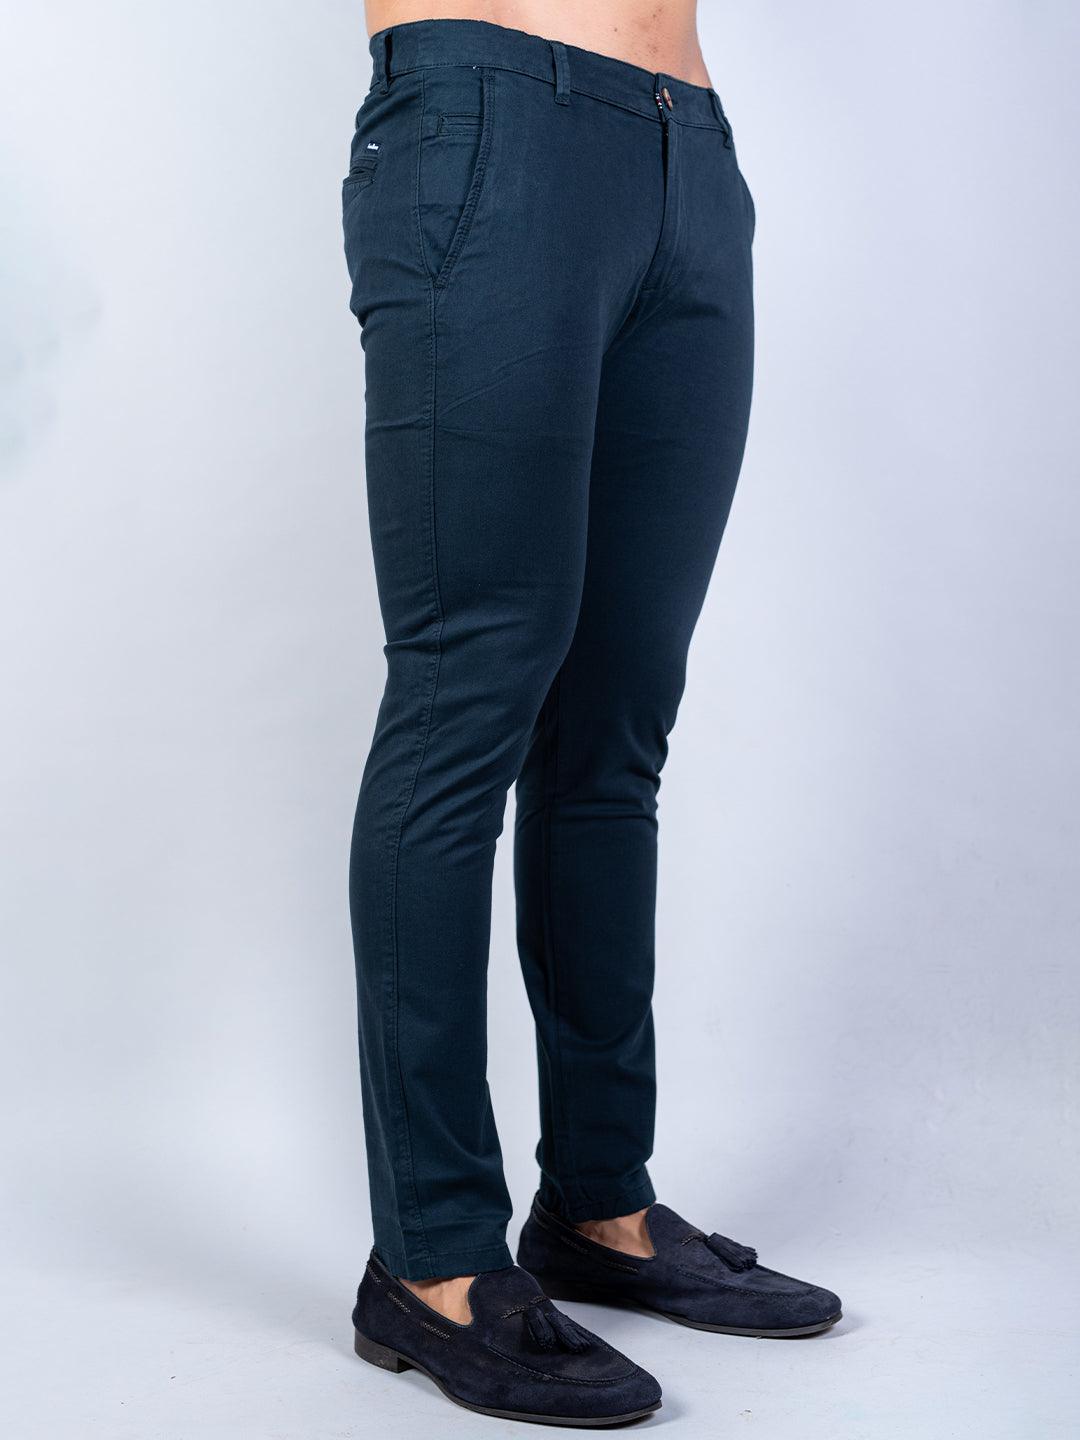 Buy MENS FORMAL NAVY BLUE TROUSERS Online In India At Discounted Prices